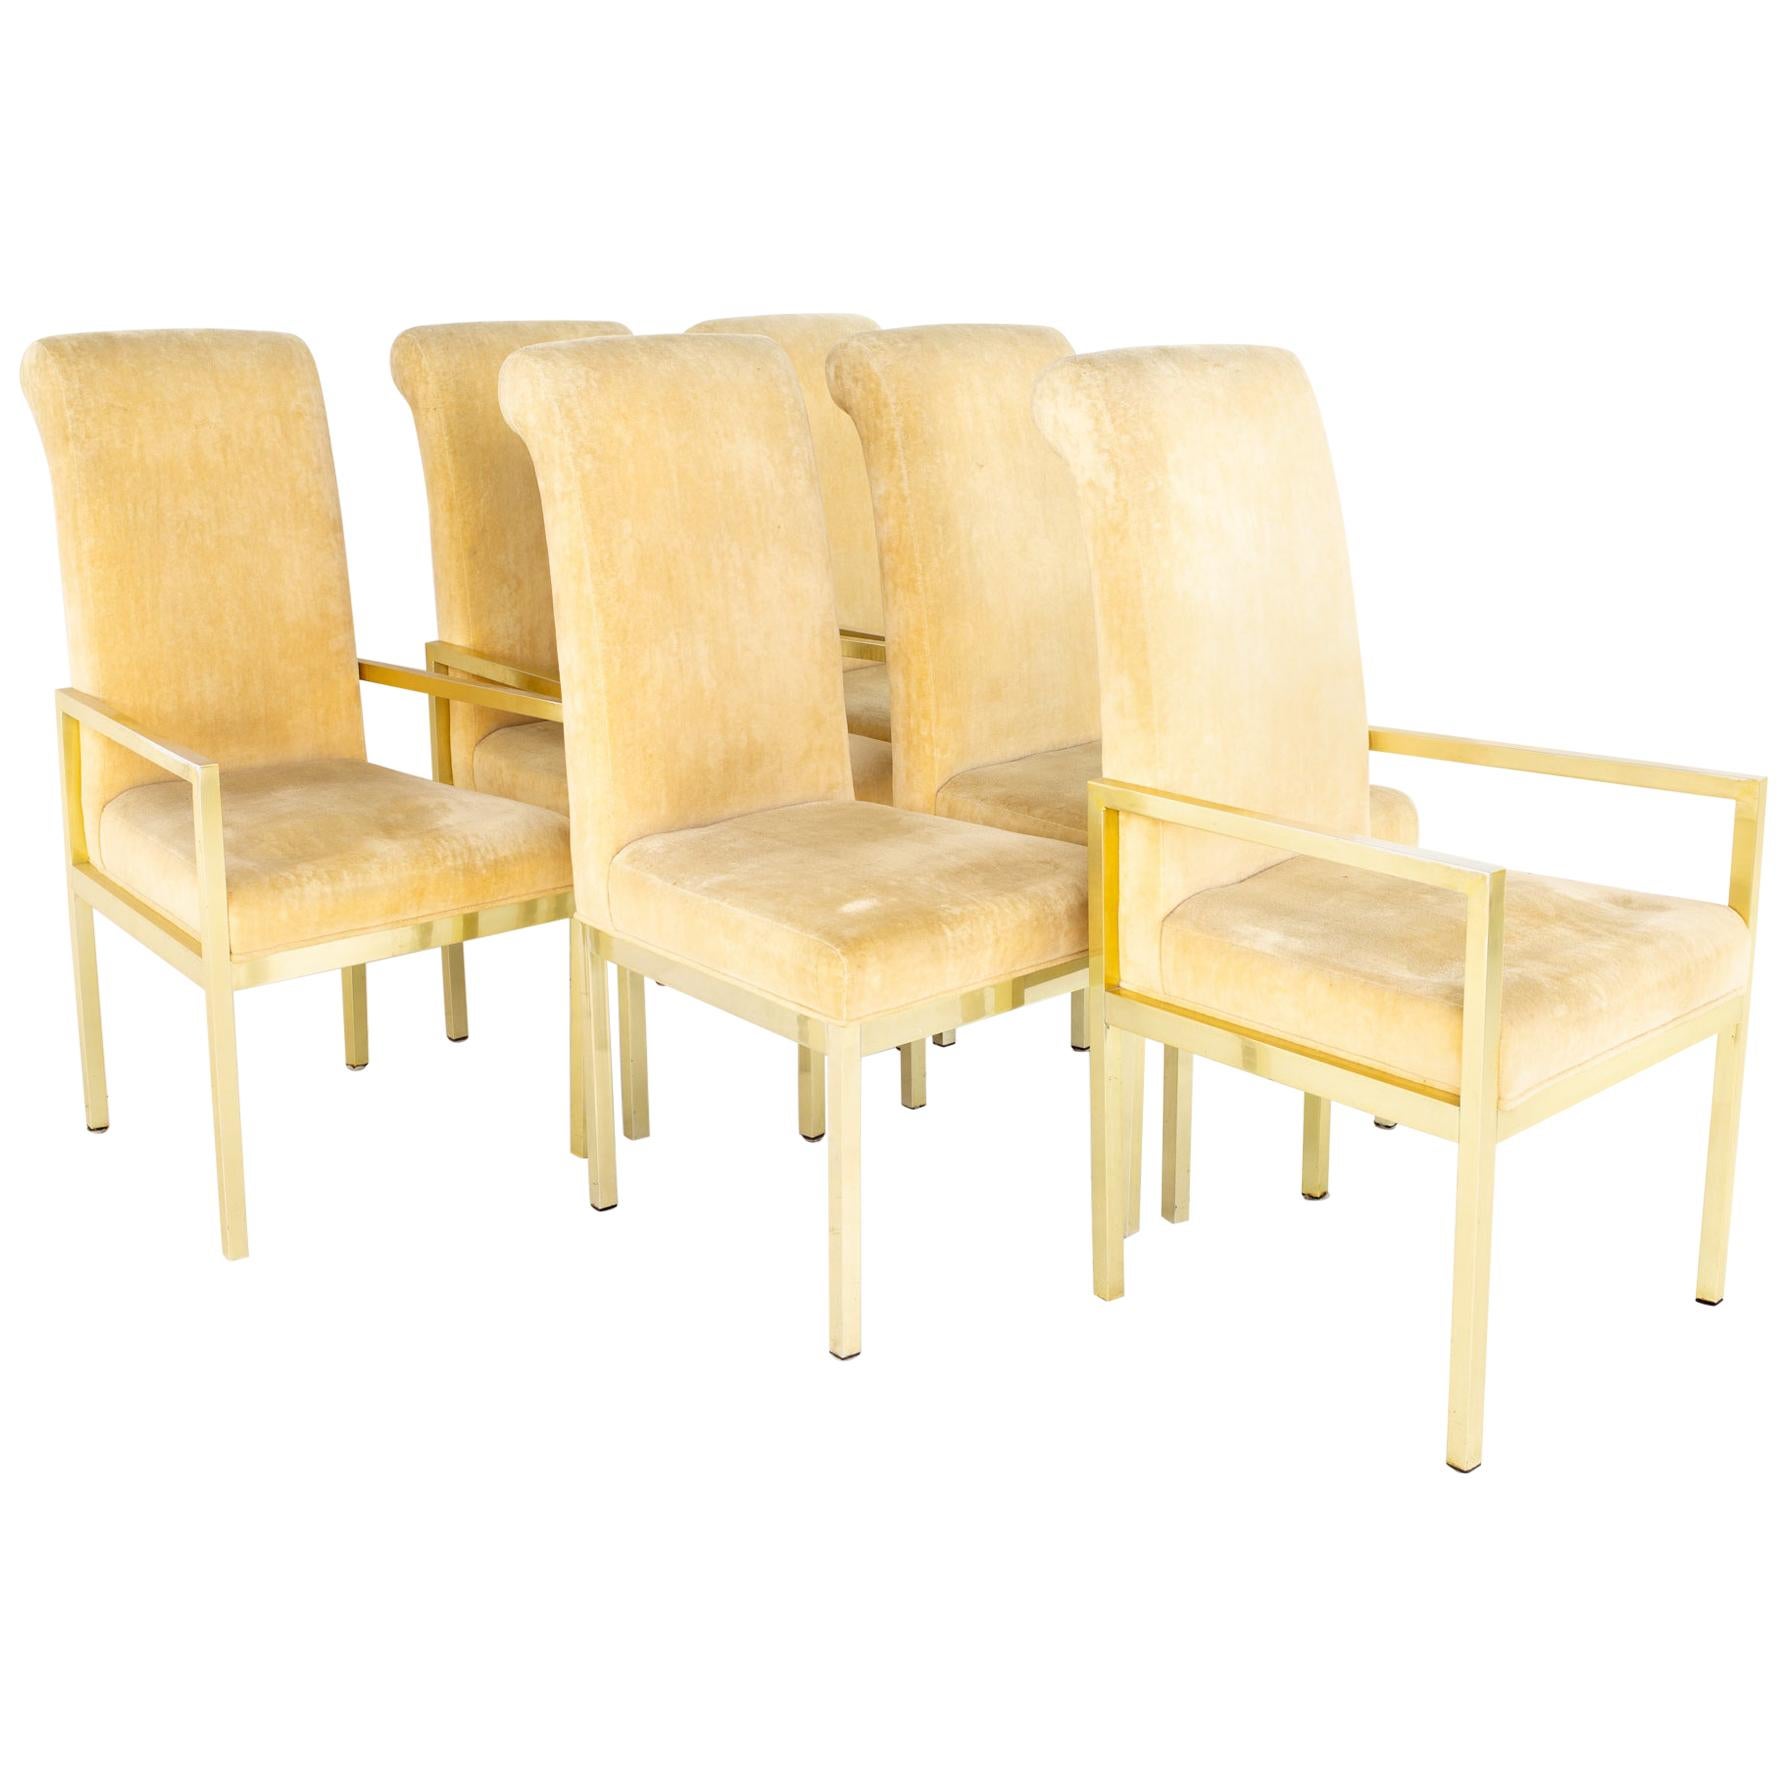 Design Institute of America MCM Brass Dining Chairs - Set of 6 For Sale